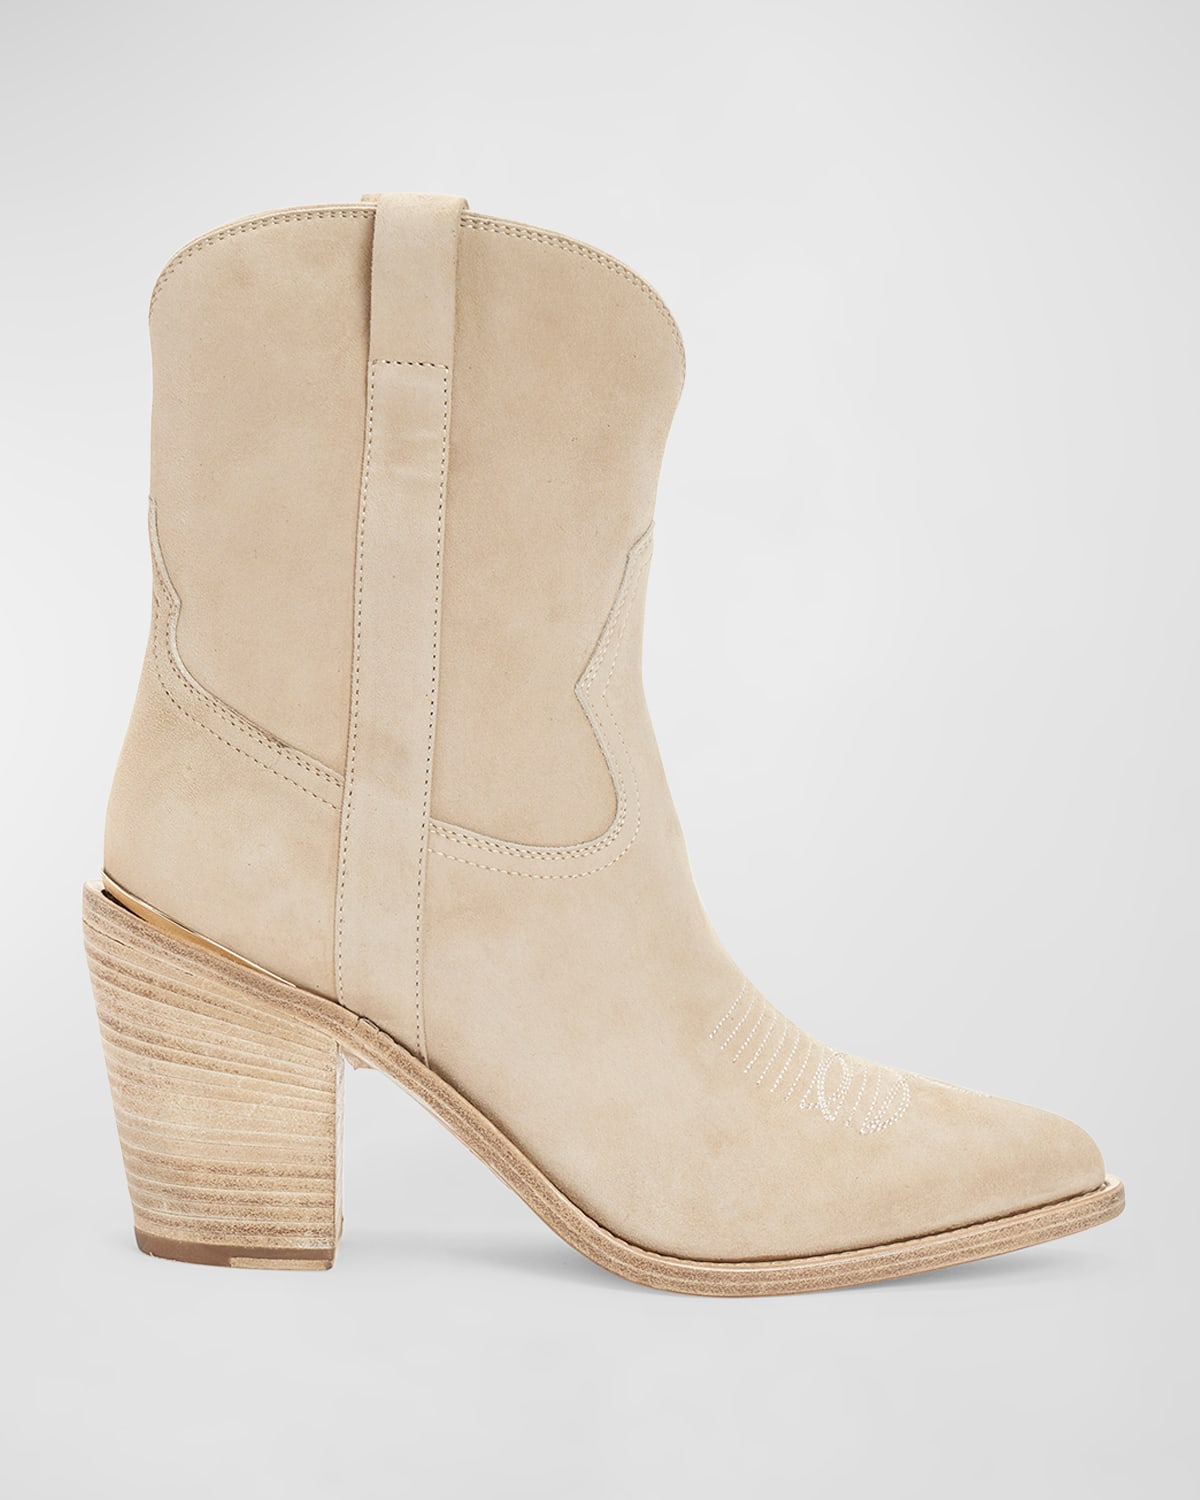 Partlow Leigh Anne Suede Western Ankle Booties In Sabbia